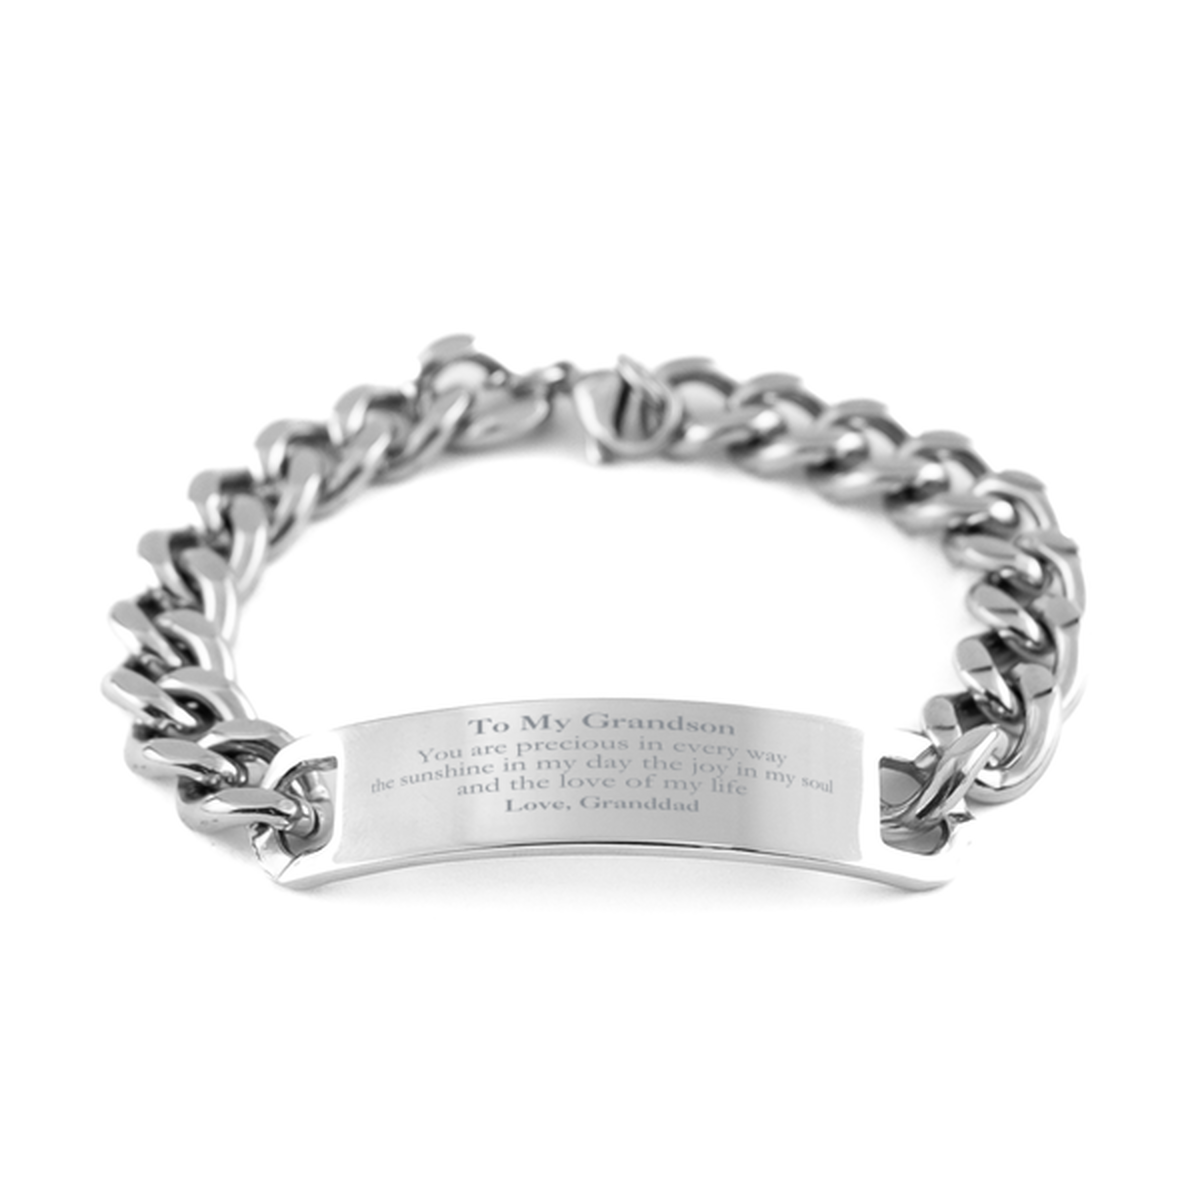 Graduation Gifts for Grandson Cuban Chain Stainless Steel Bracelet Present from Granddad, Christmas Grandson Birthday Gifts Grandson You are precious in every way the sunshine in my day. Love, Granddad